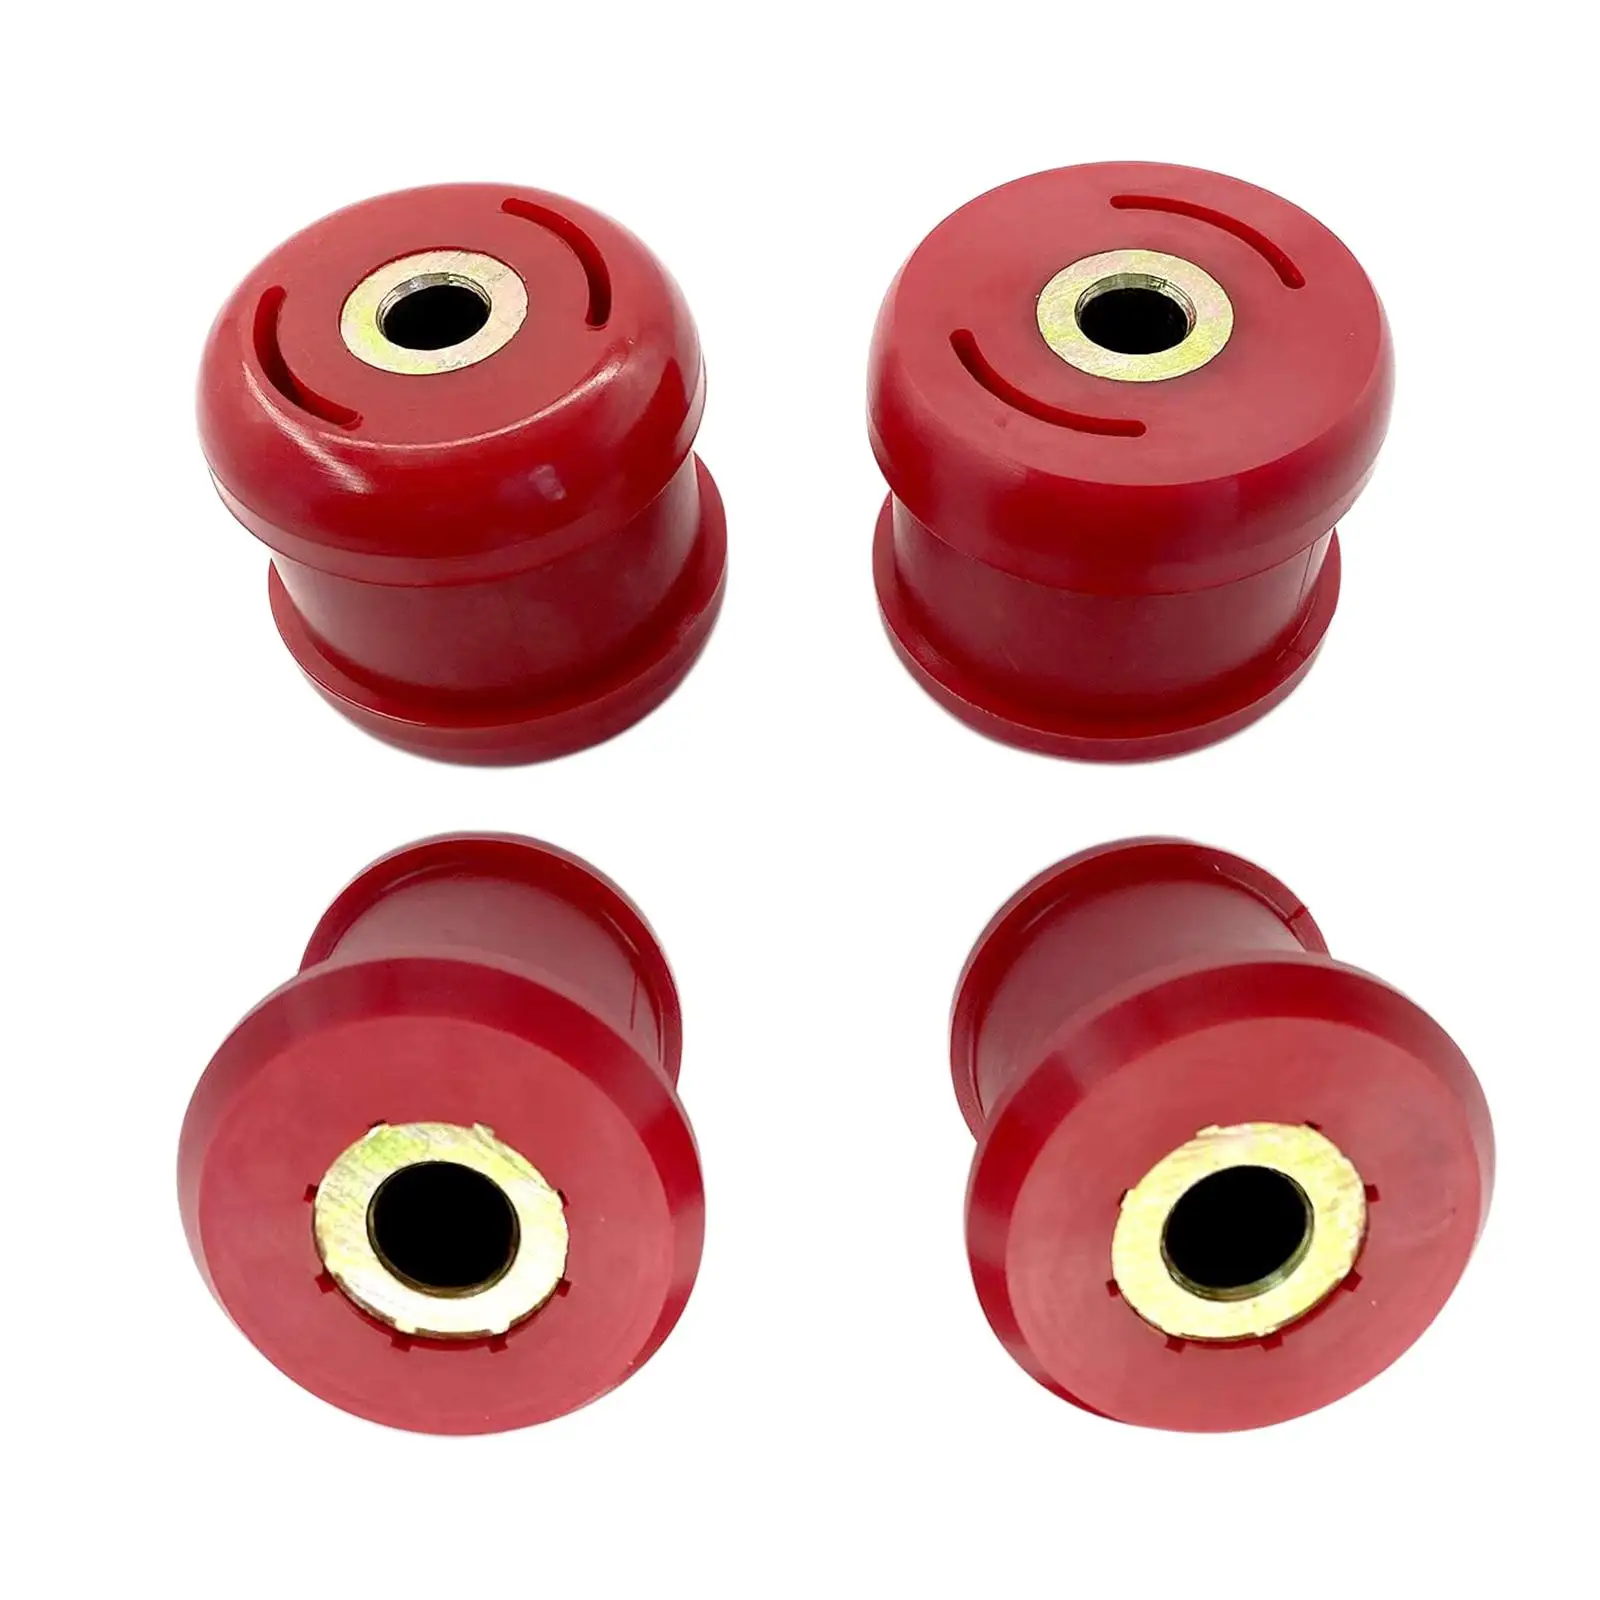 4Pieces Front Lower Control Arm Bushing Replaces red Durable Spare Parts Bbj-Hd1-402F-Rd-839-D0 8-215 for RSX